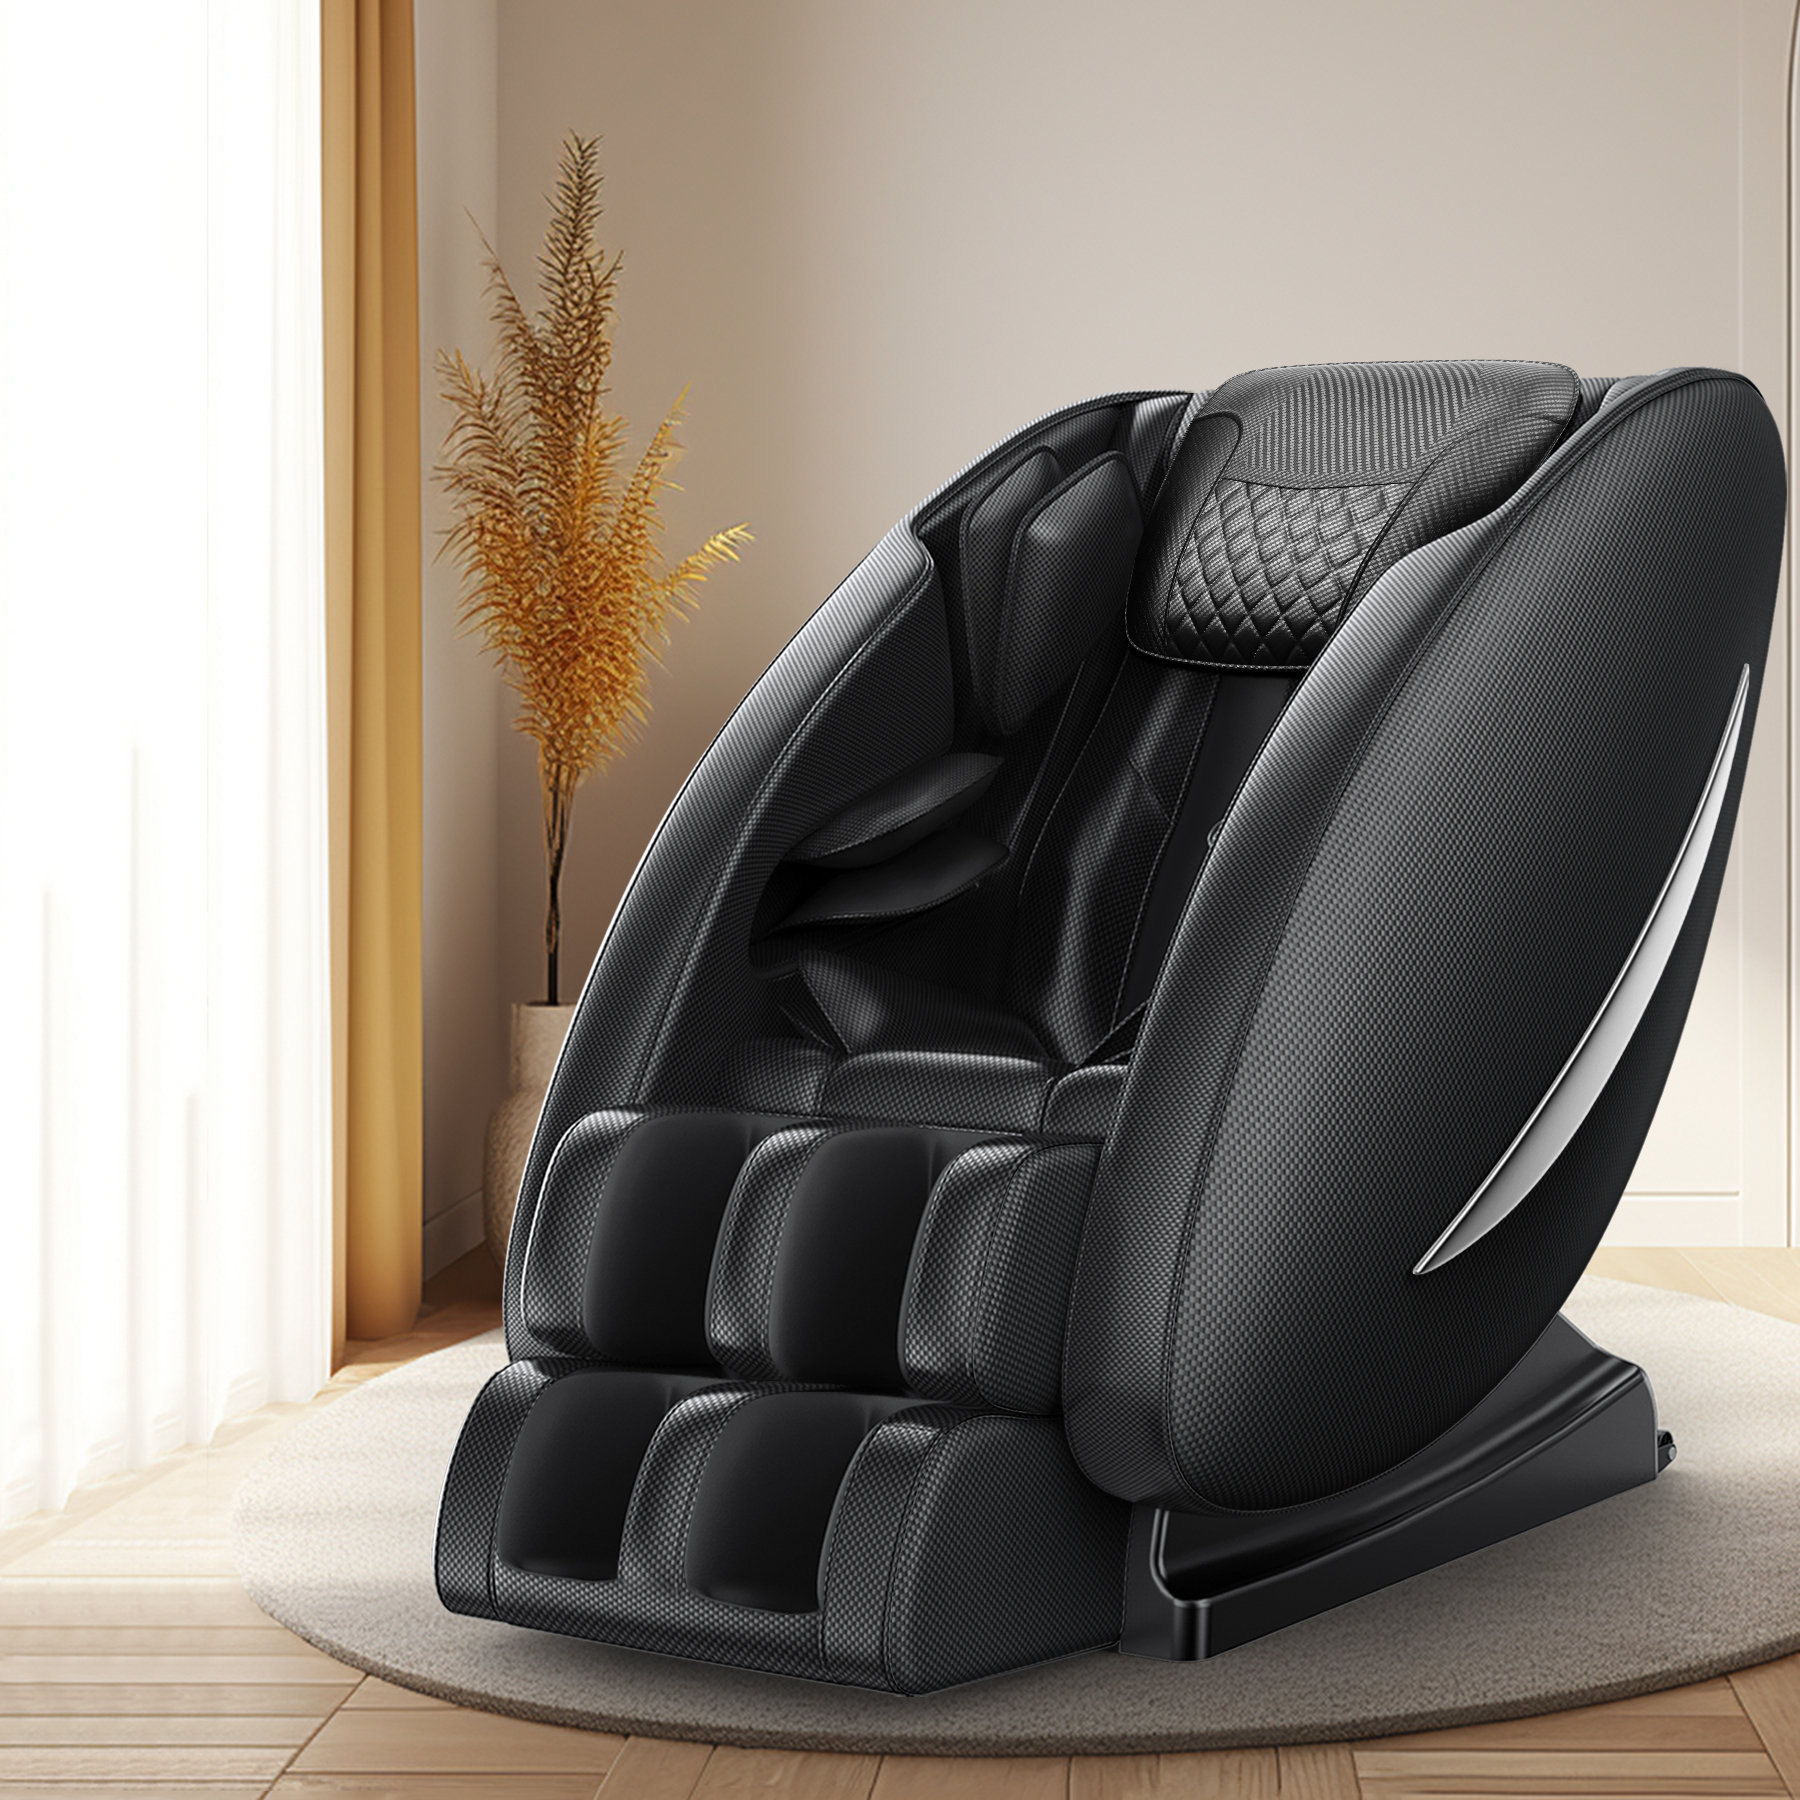 Six Motor Massage Cushion with Heat for Chairs & Car Seats